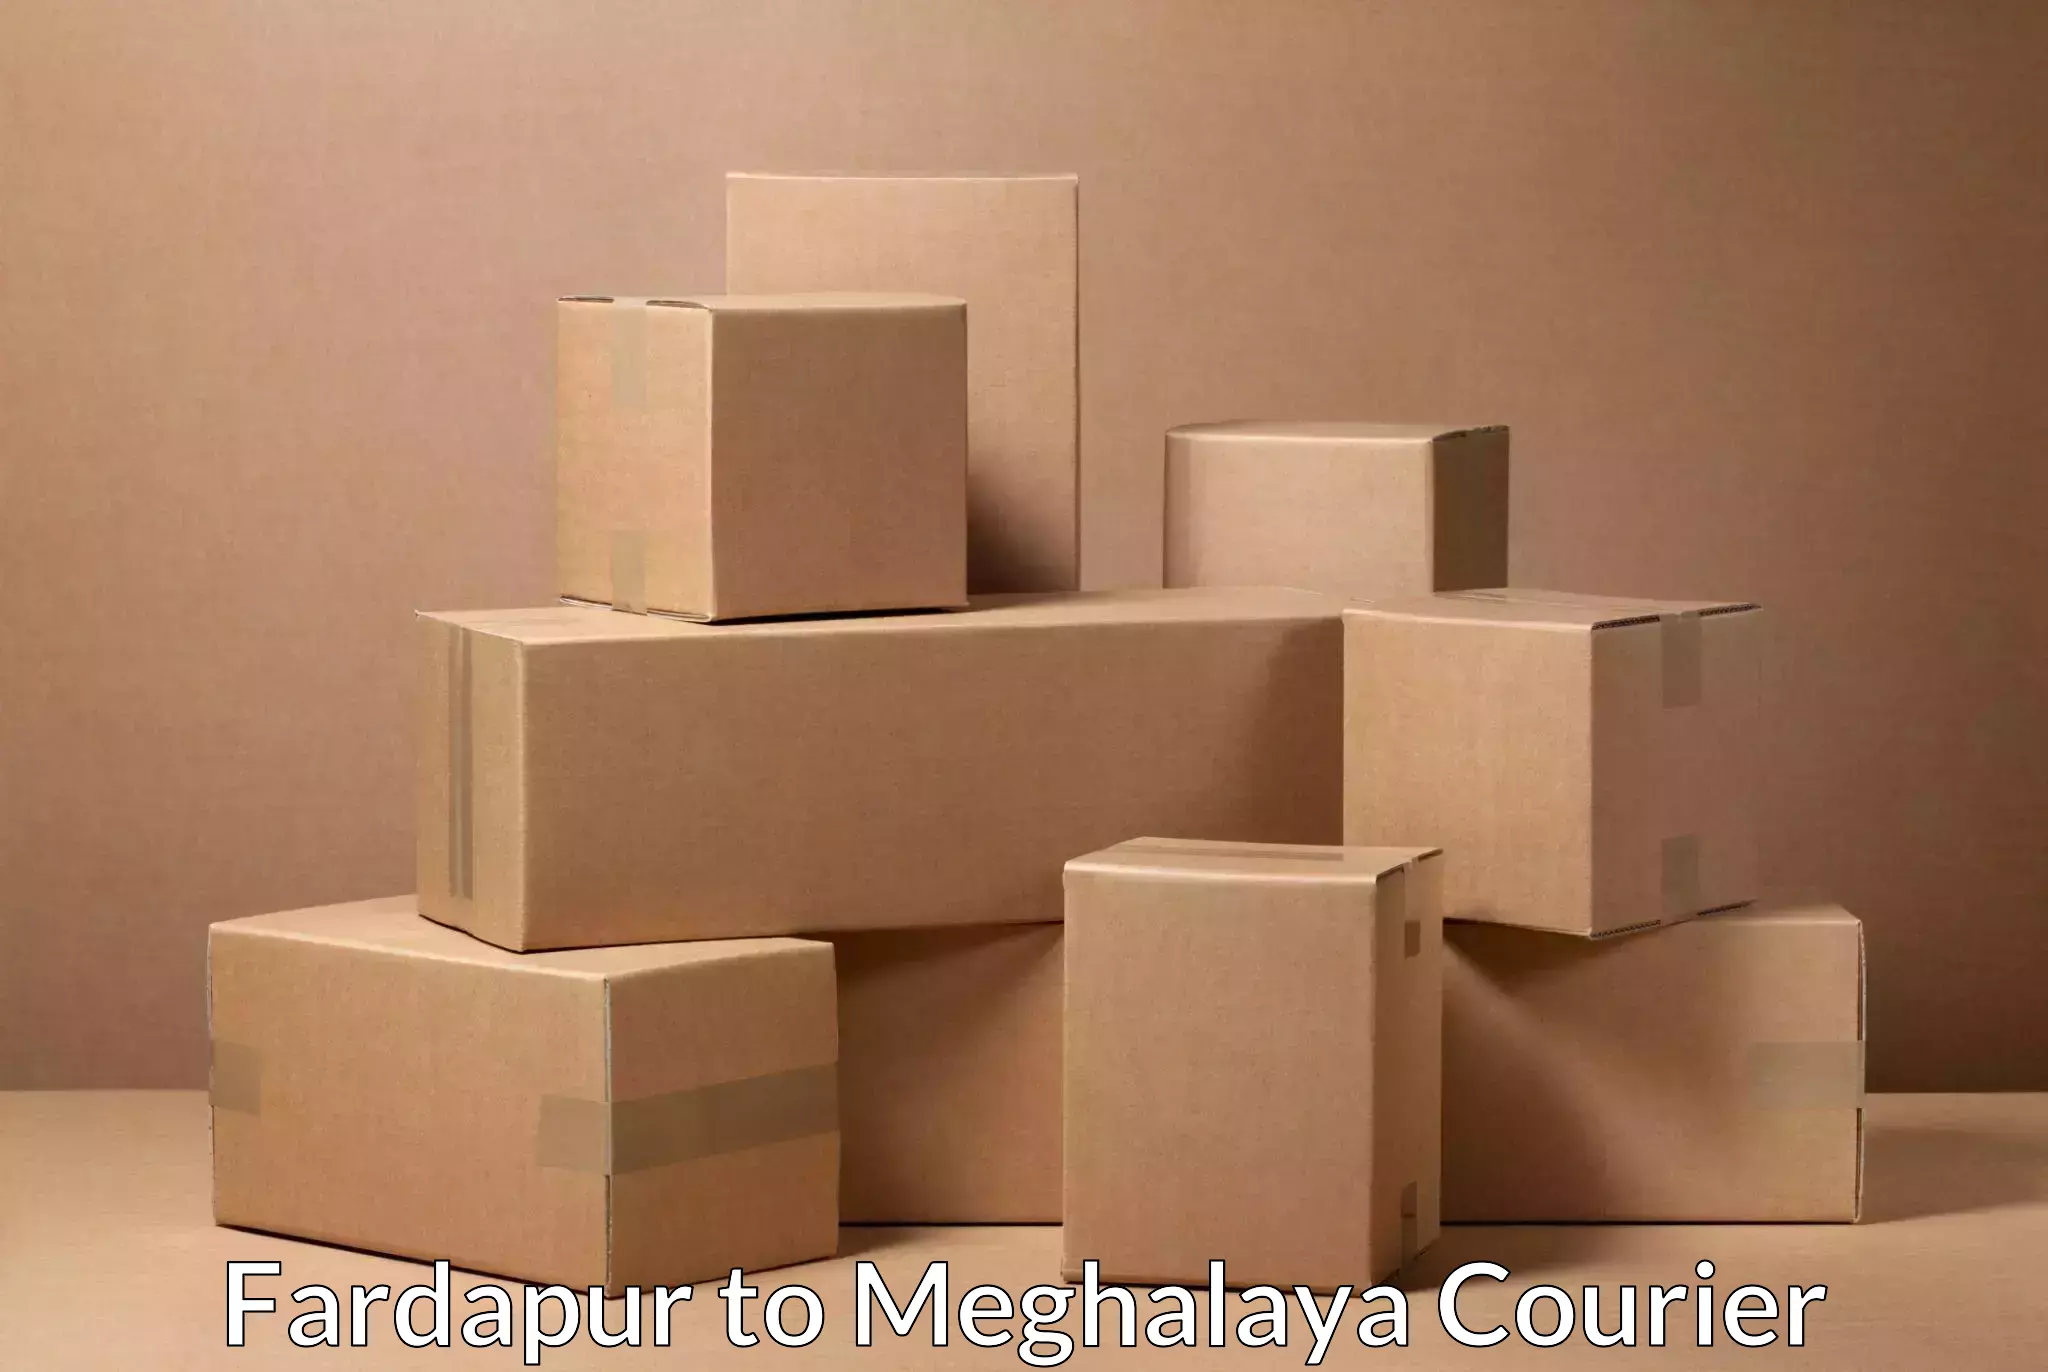 Local courier options in Fardapur to Garobadha